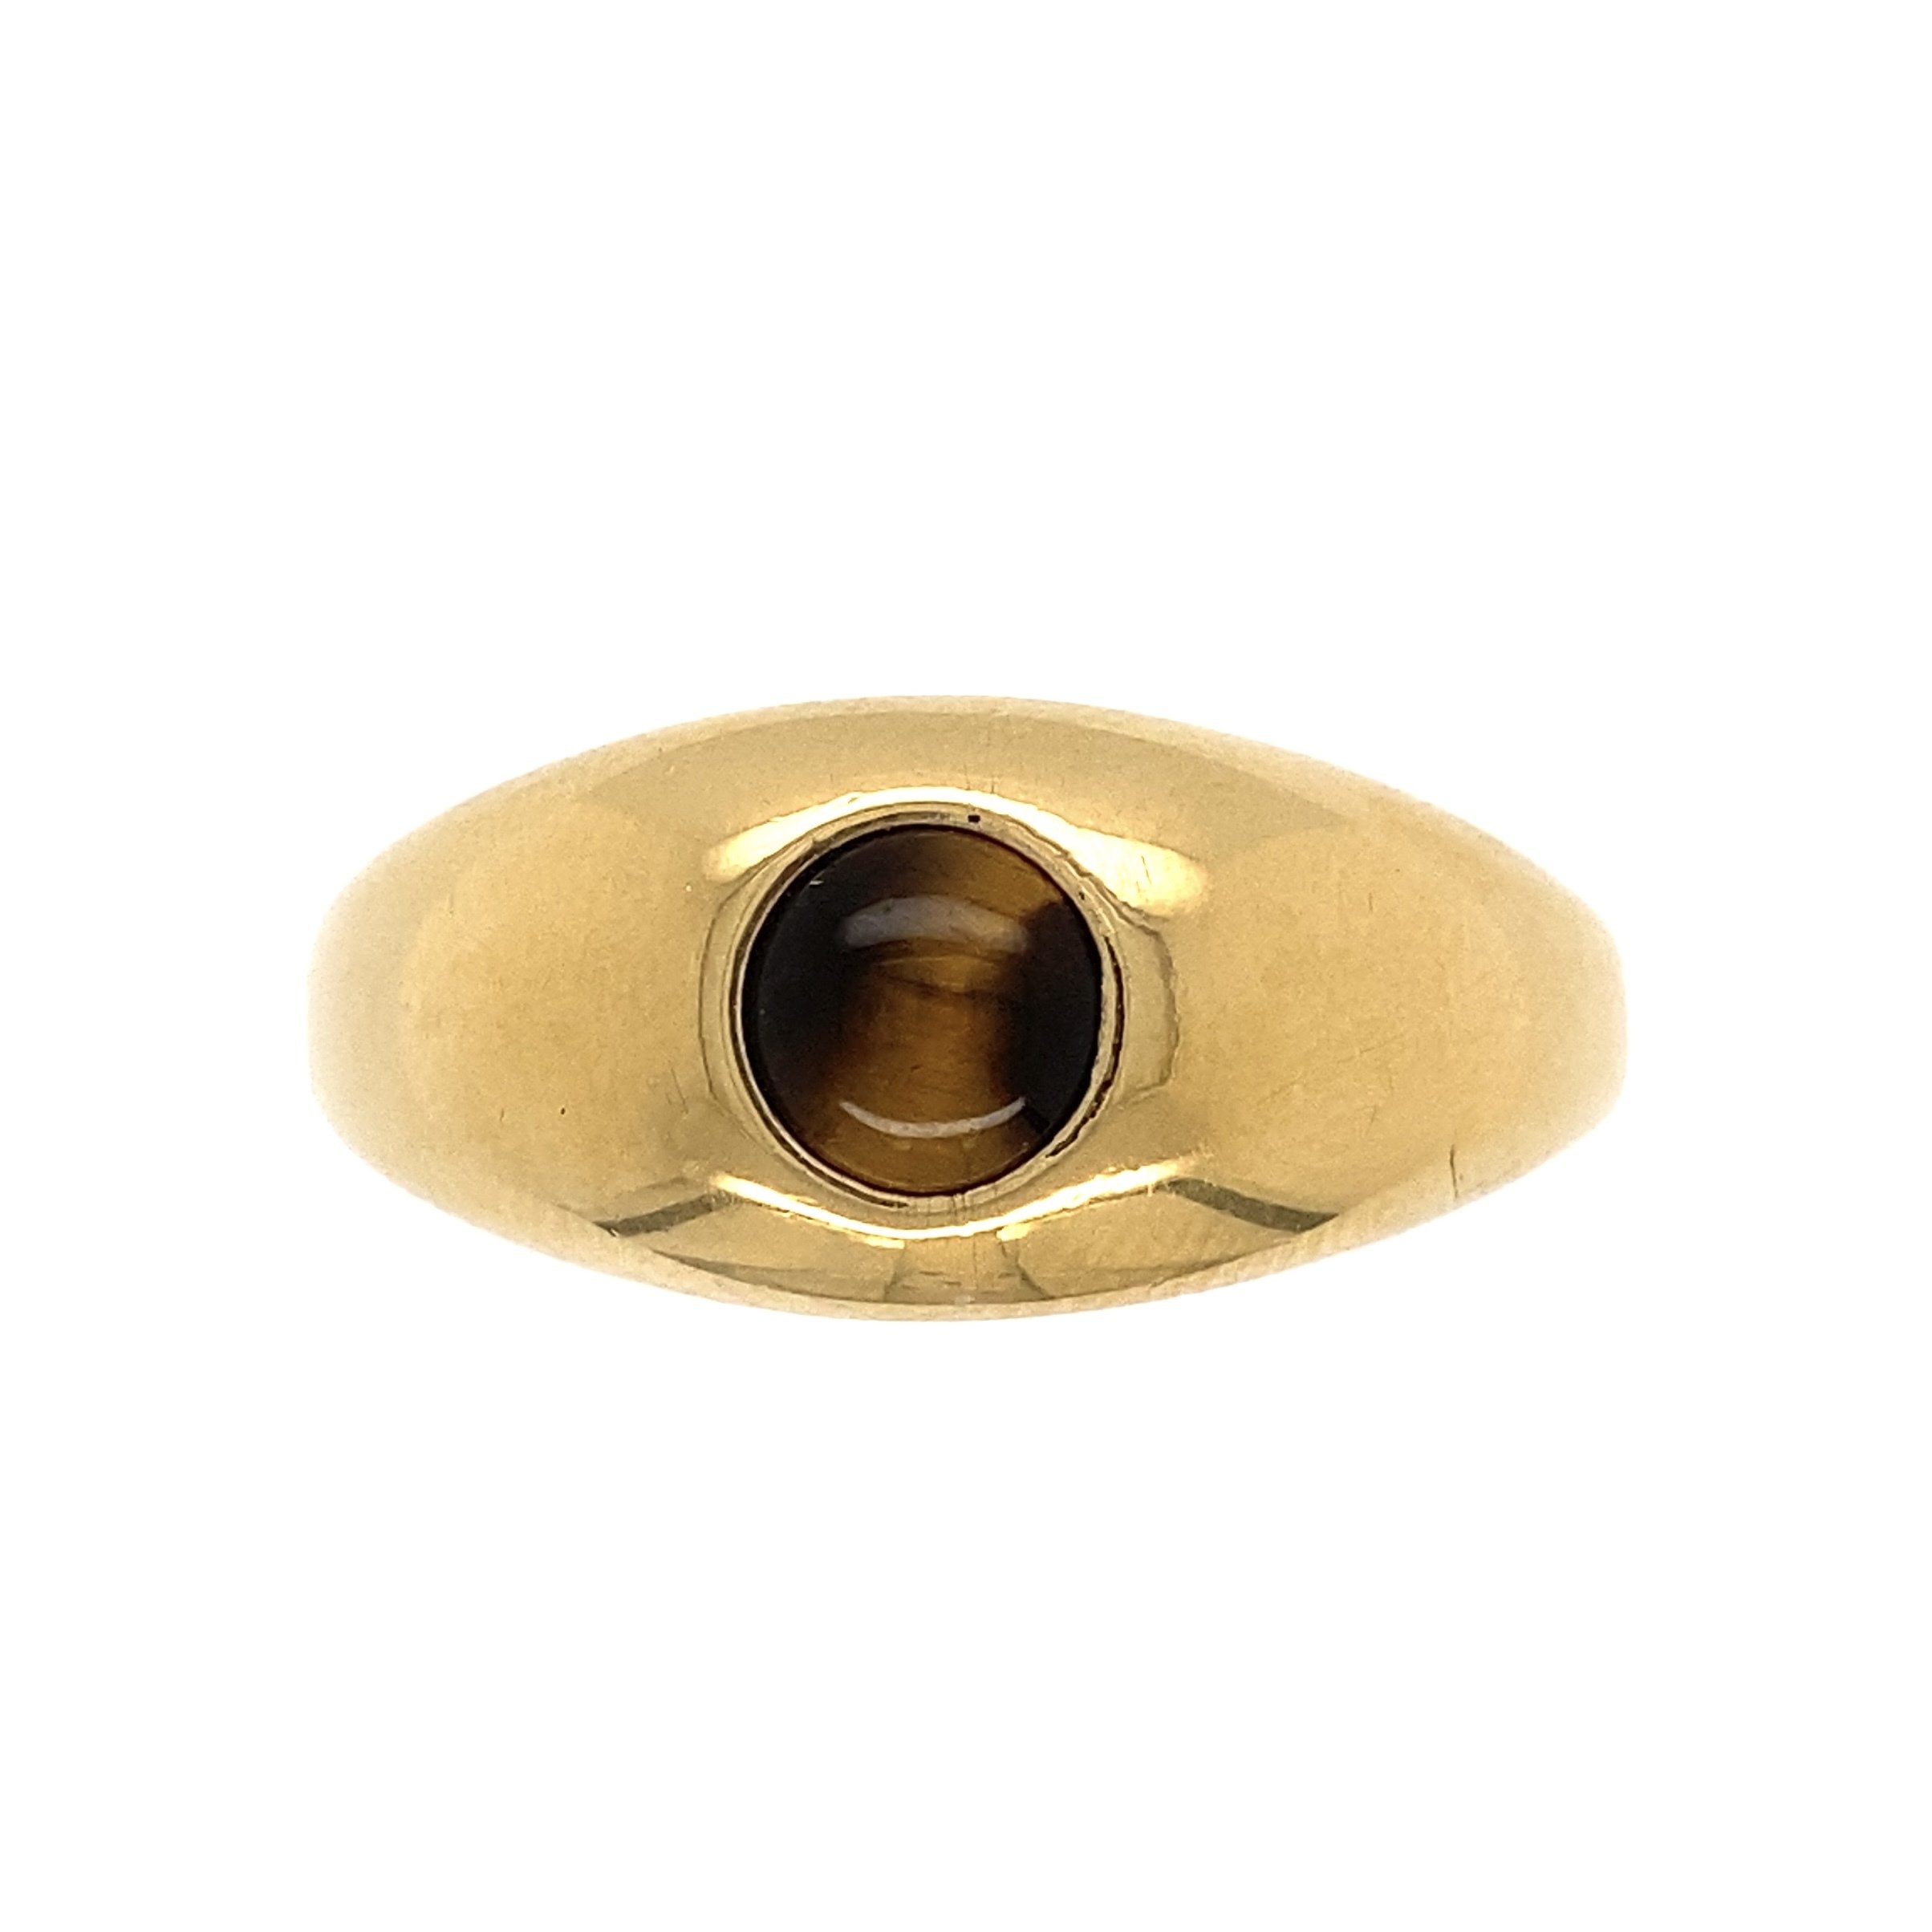 18K YG Gent's Band with Tiger's Eye Cabochon 7.7g, s13